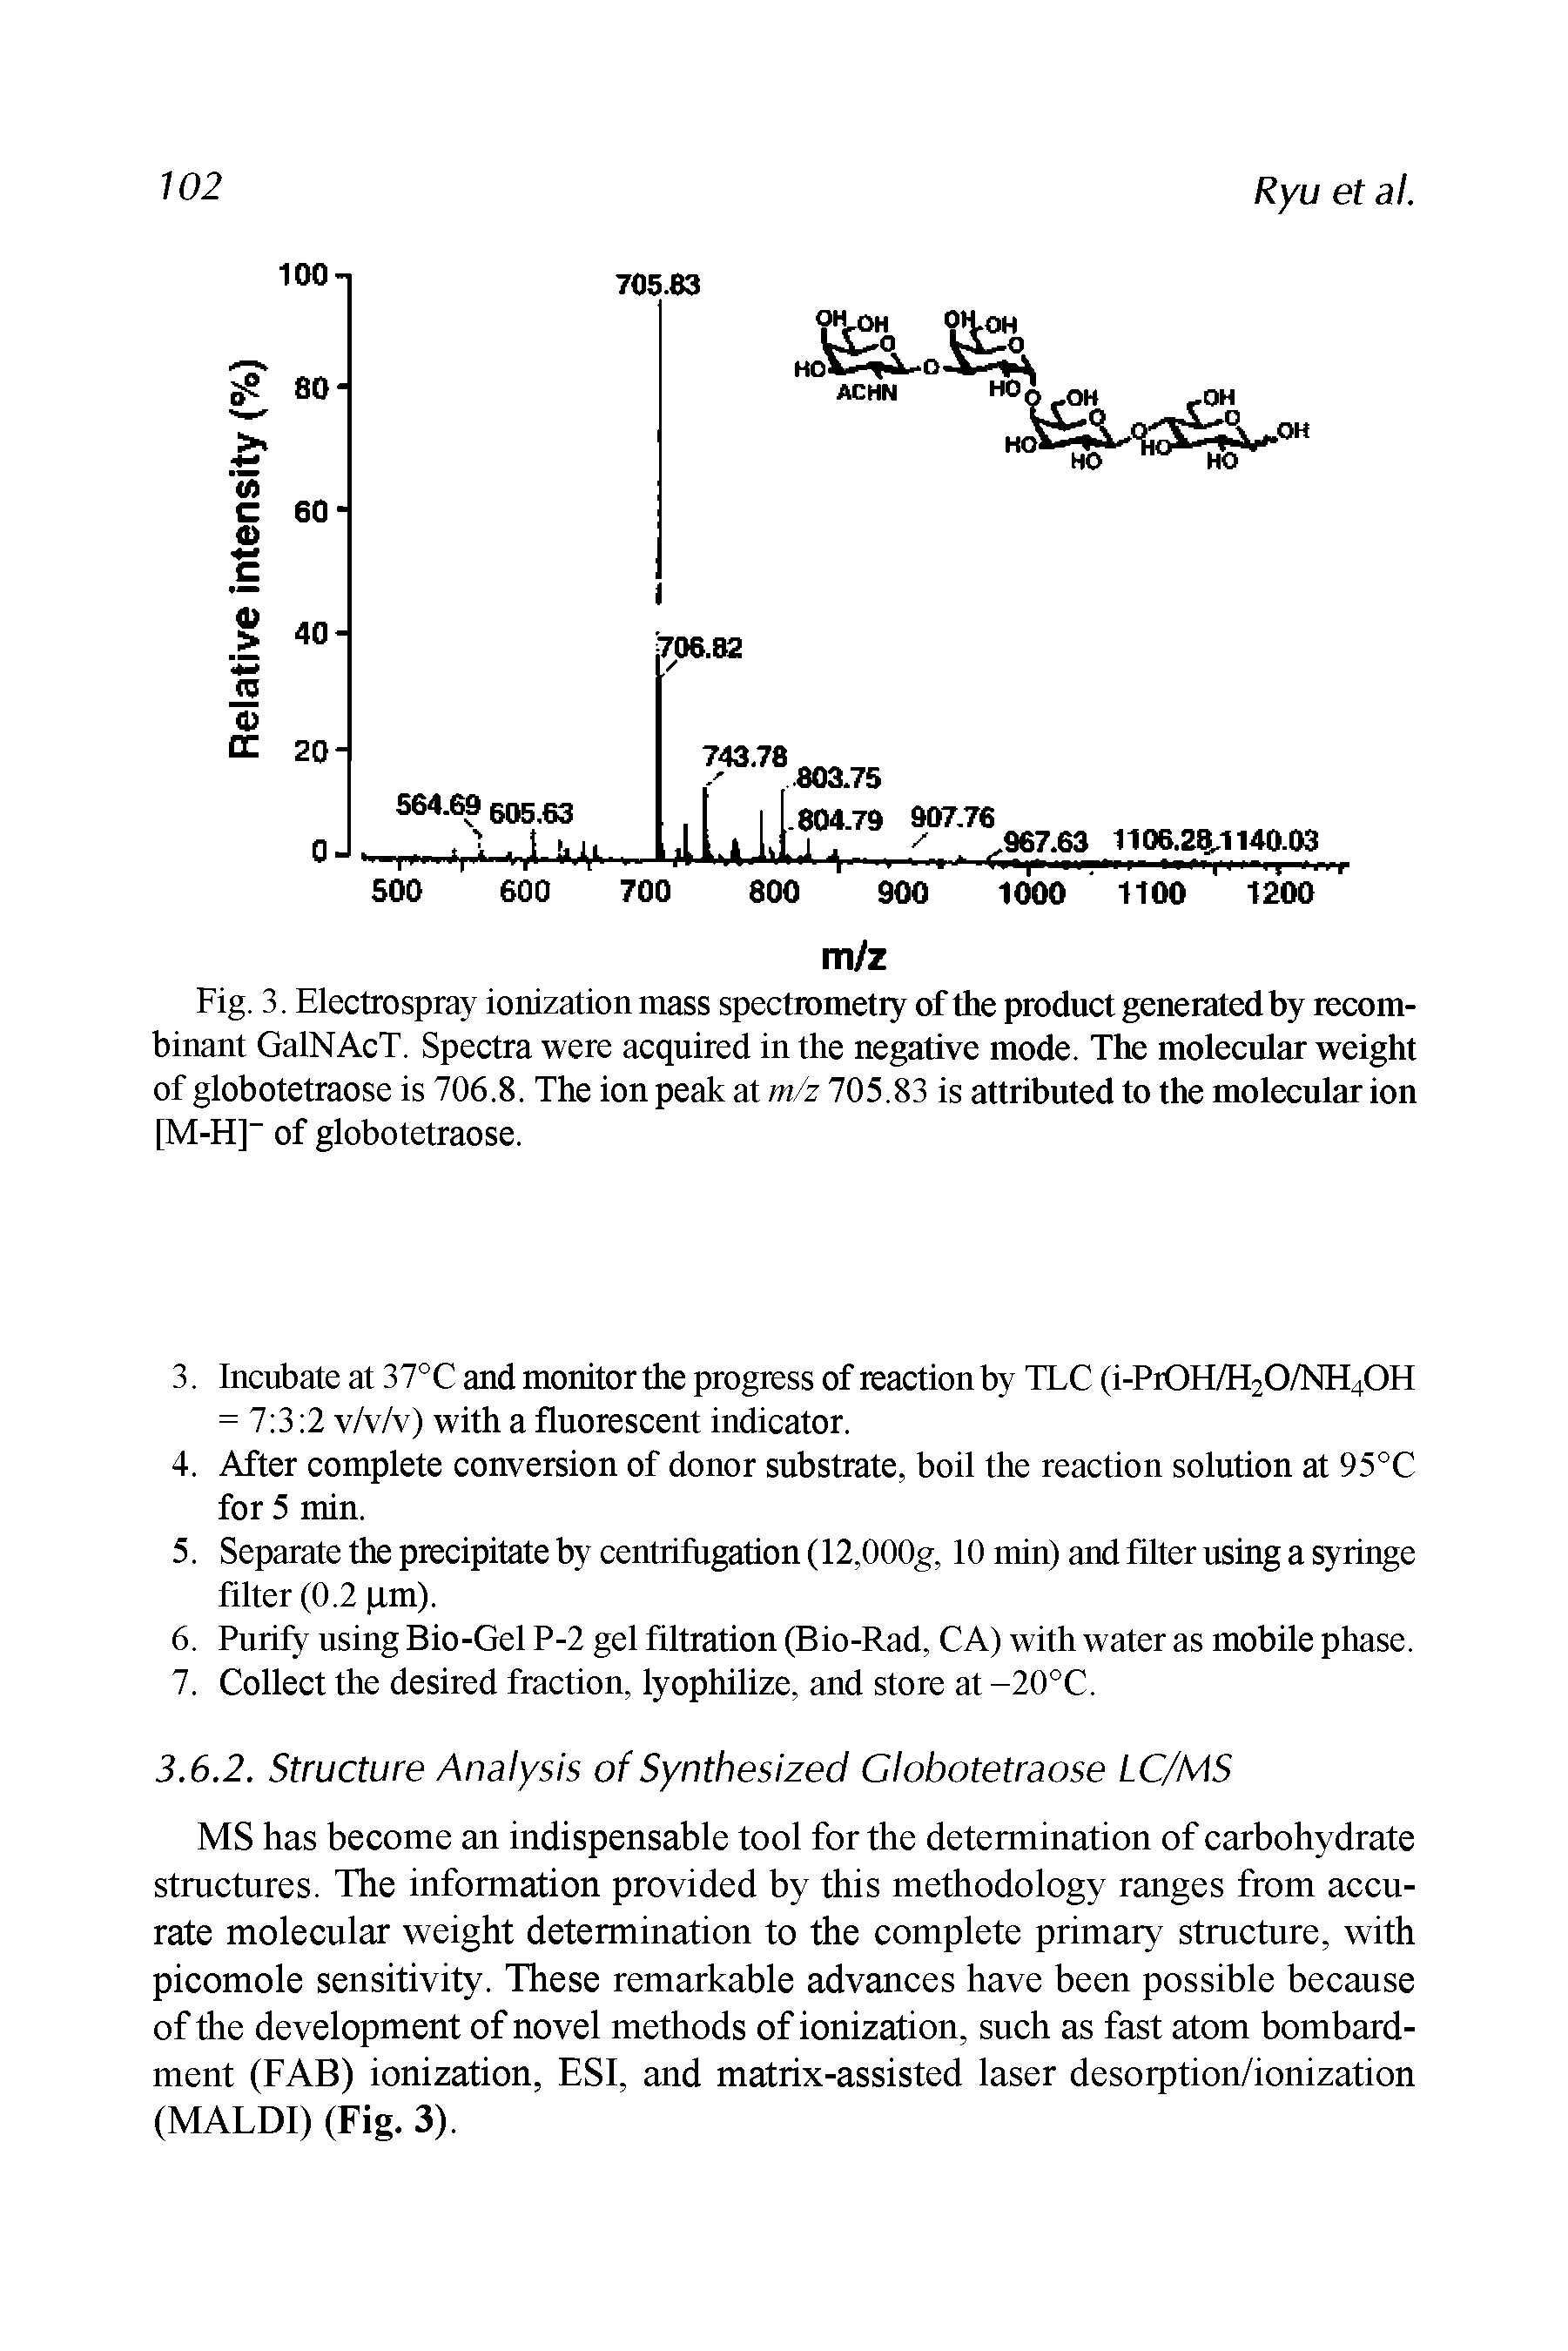 Fig. 3. Electro spray ionization mass spectrometry of the product generated by recombinant GalNAcT. Spectra were acquired in the negative mode. The molecular weight of globotetraose is 706.8. The ion peak at m/z 705.83 is attributed to the molecular ion M-H] of globotetraose.